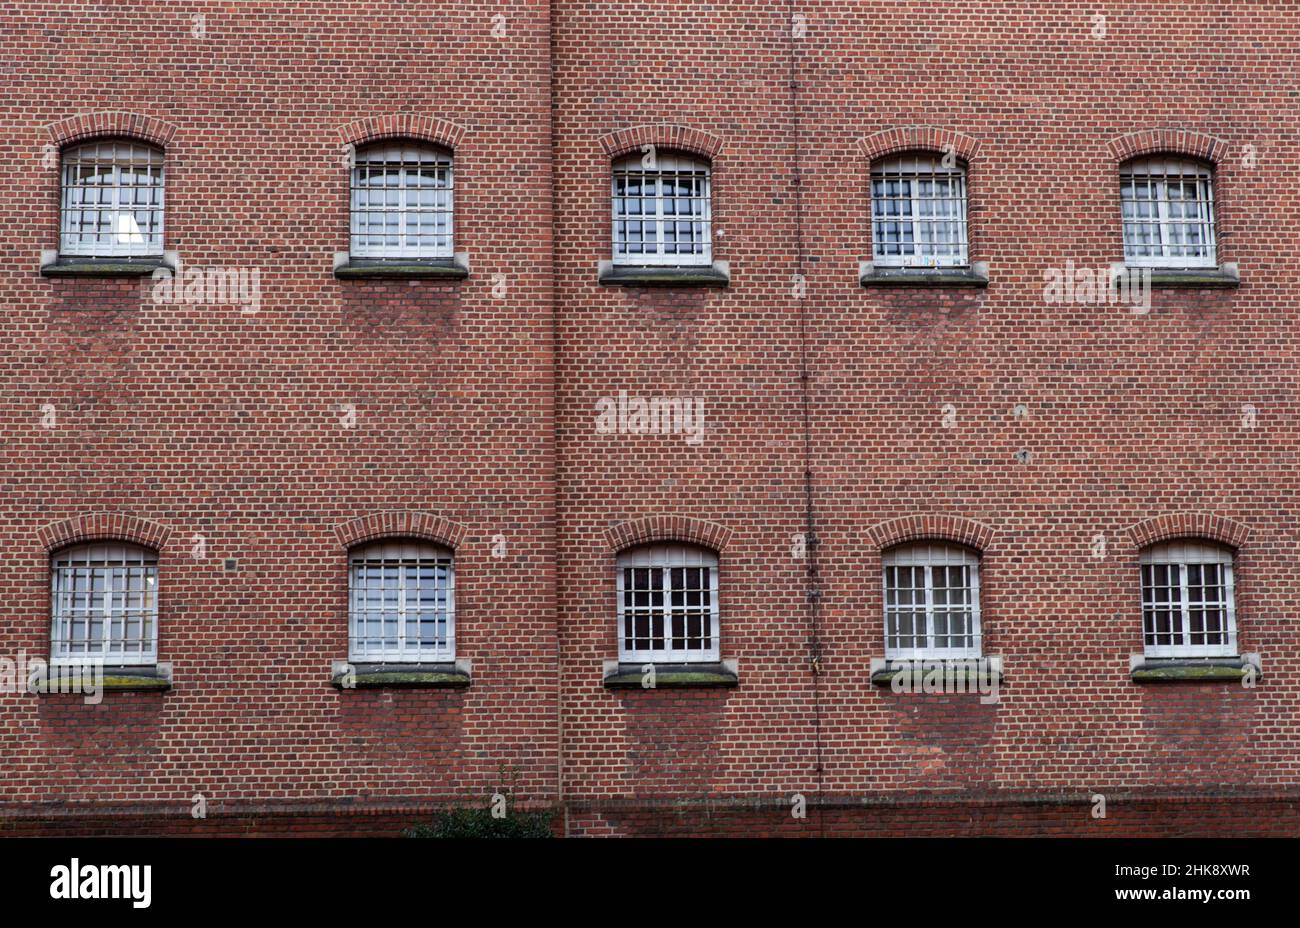 Vechta, Germany. 01st Feb, 2022. Barred windows characterize the facade of the Vechta correctional facility. Artistic activity is an important part of treatment in prison. Since 1993, there have been regularly changing art exhibitions under the name 'ART i. G. - Art in Prison'. Works by imprisoned women are shown as well as those by external artists. (to dpa 'Women in prison in Vechta exhibit their art') Credit: Friso Gentsch/dpa/Alamy Live News Stock Photo